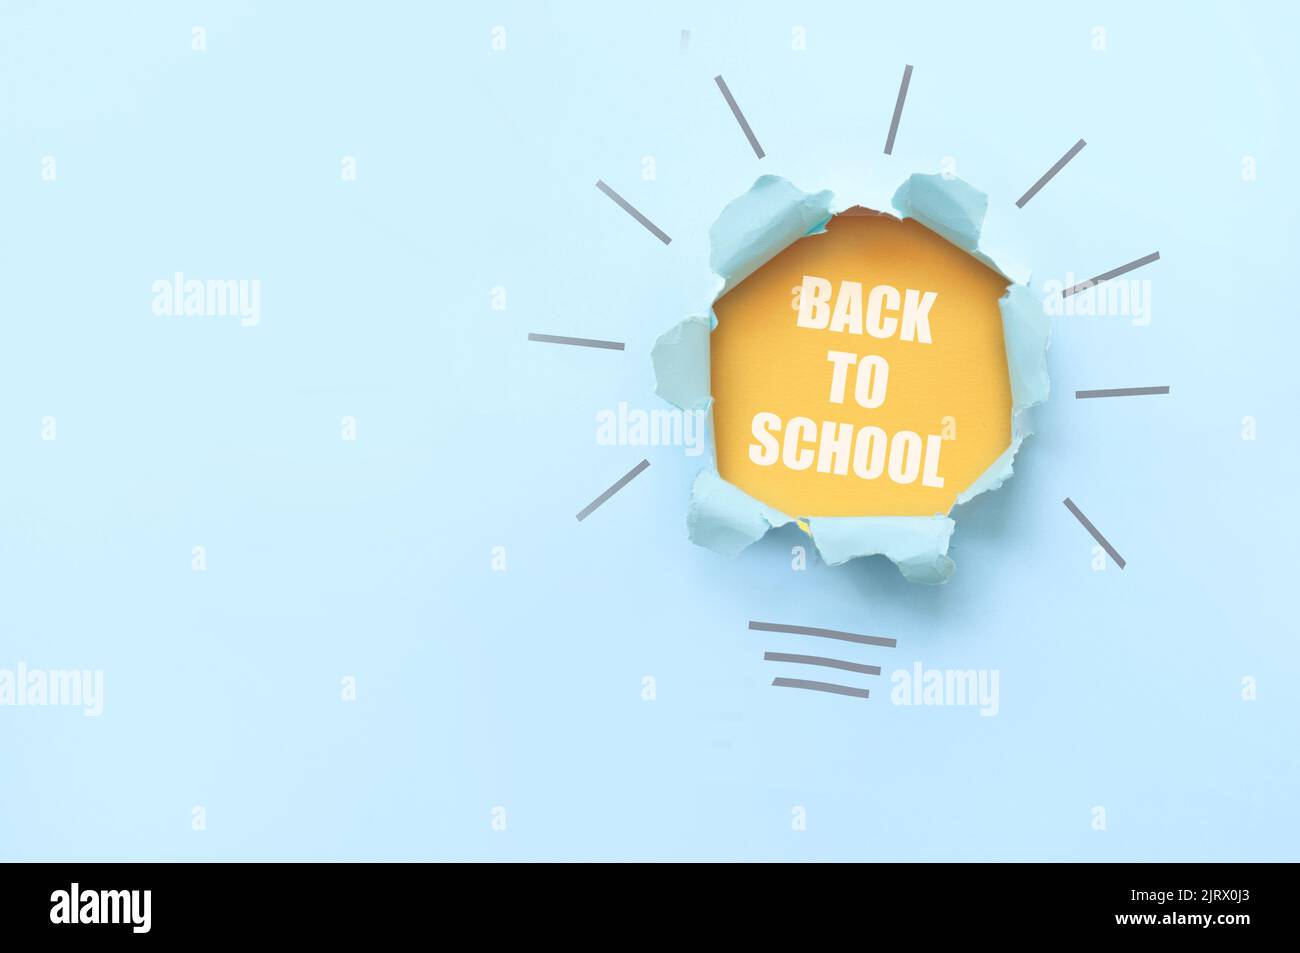 Back to school light bulb shape revealed from torn paper with orange layer underneath Stock Photo